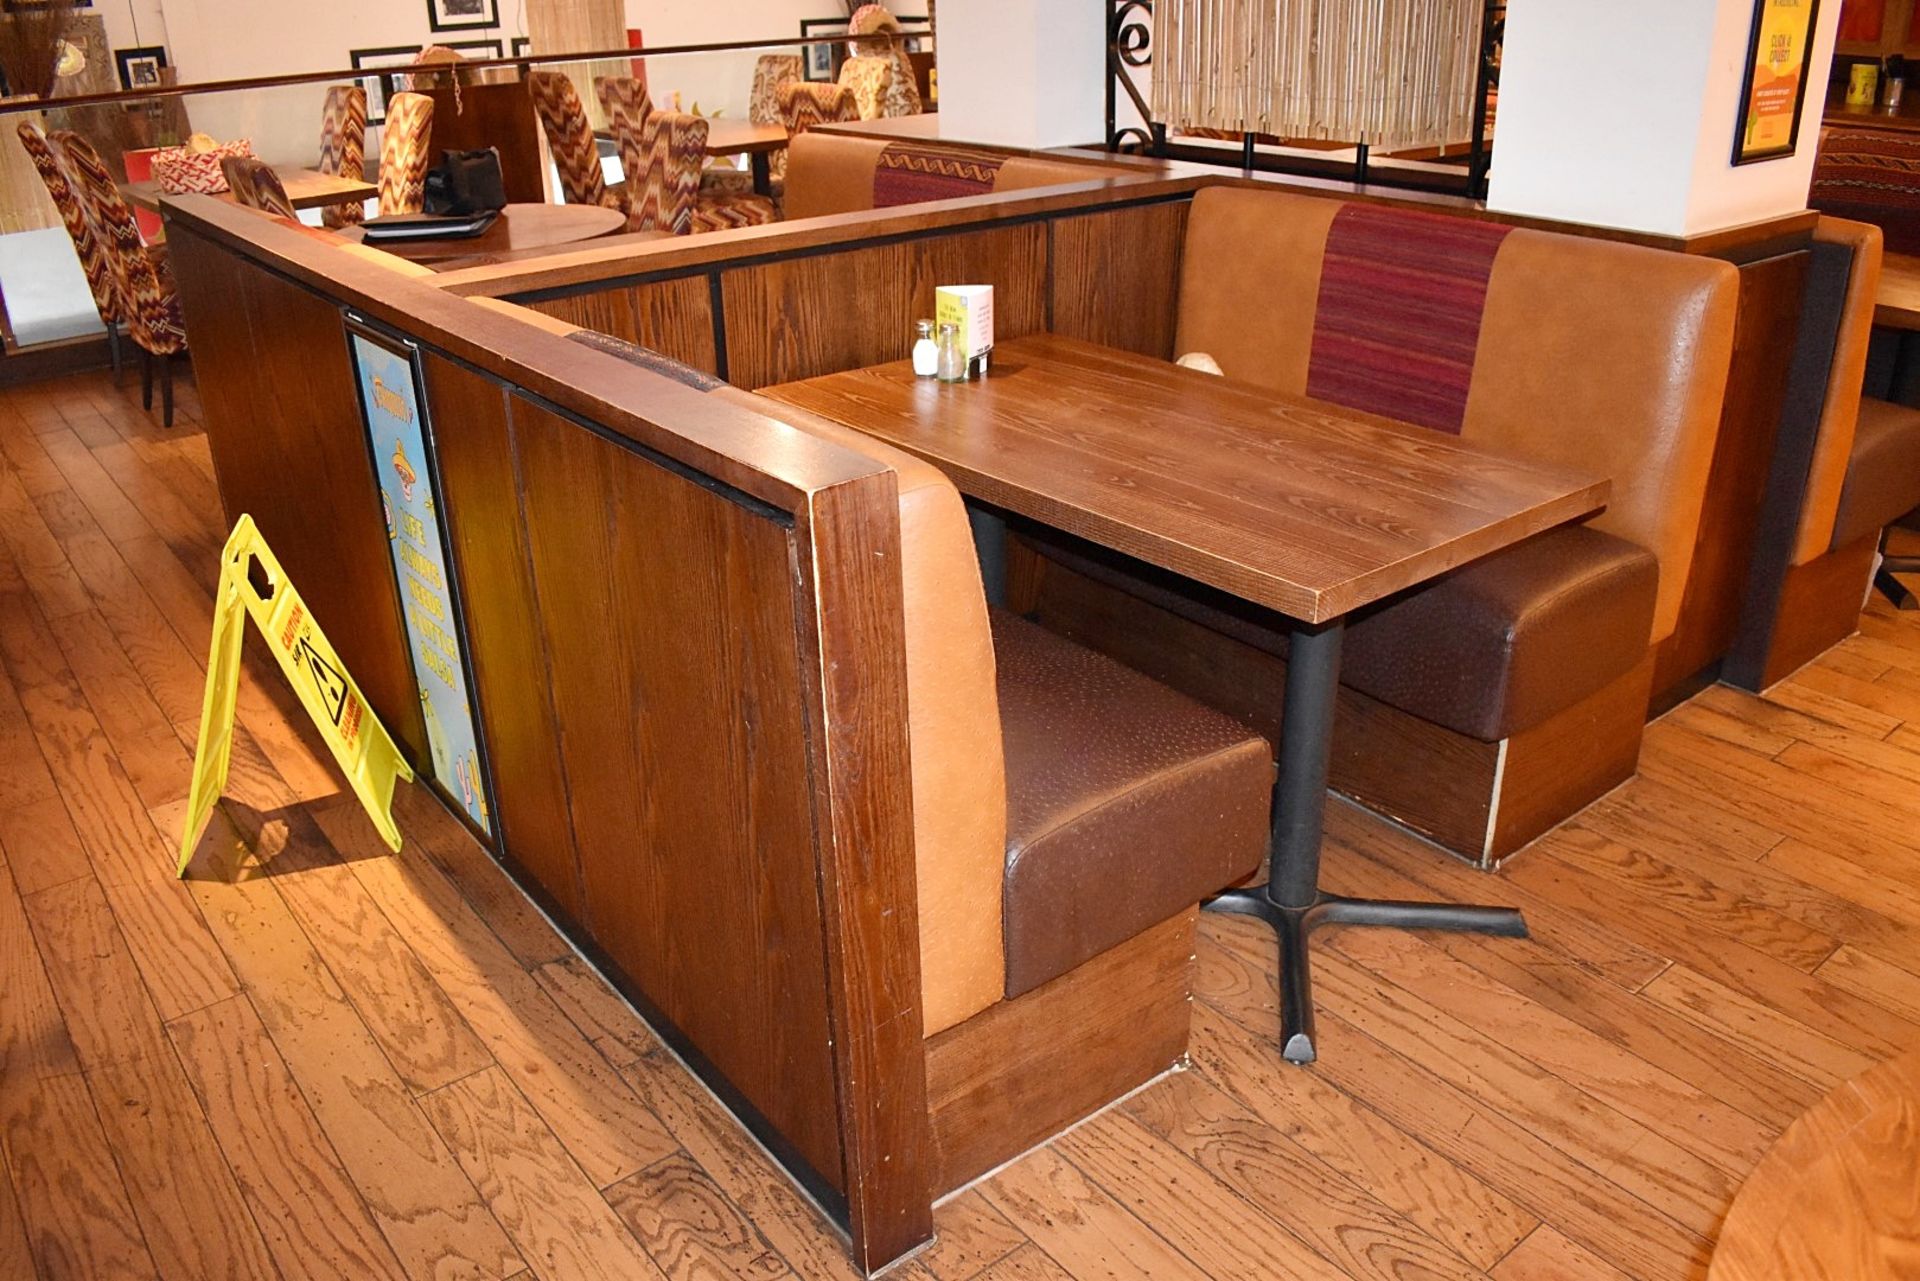 15-Pieces Of Restaurant Booth Seating Of Varying Length - Image 14 of 22